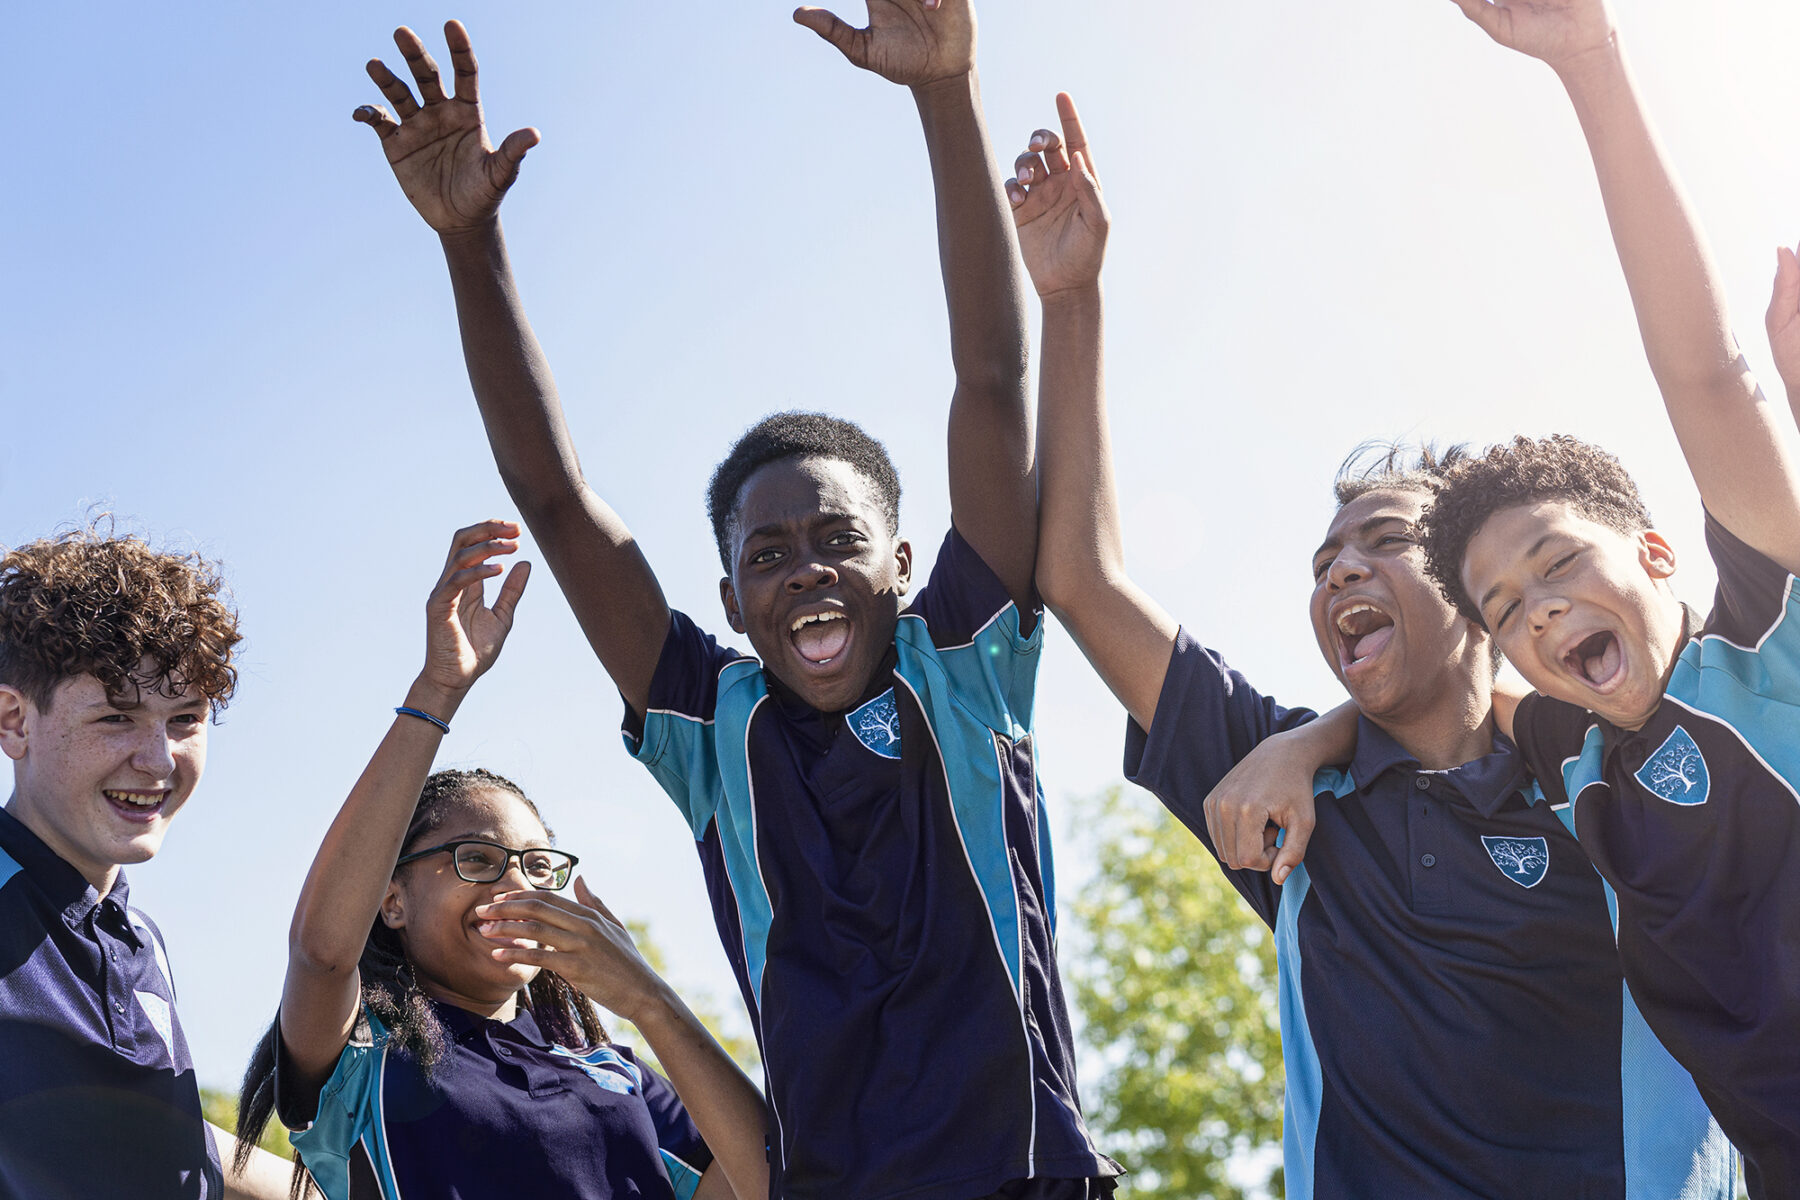 a group of pupil from Balaam school Rubery Birmingham with their arms in the air celebrating joyfully, which is now part of the King Edwards VI schools Foundation Birmingham